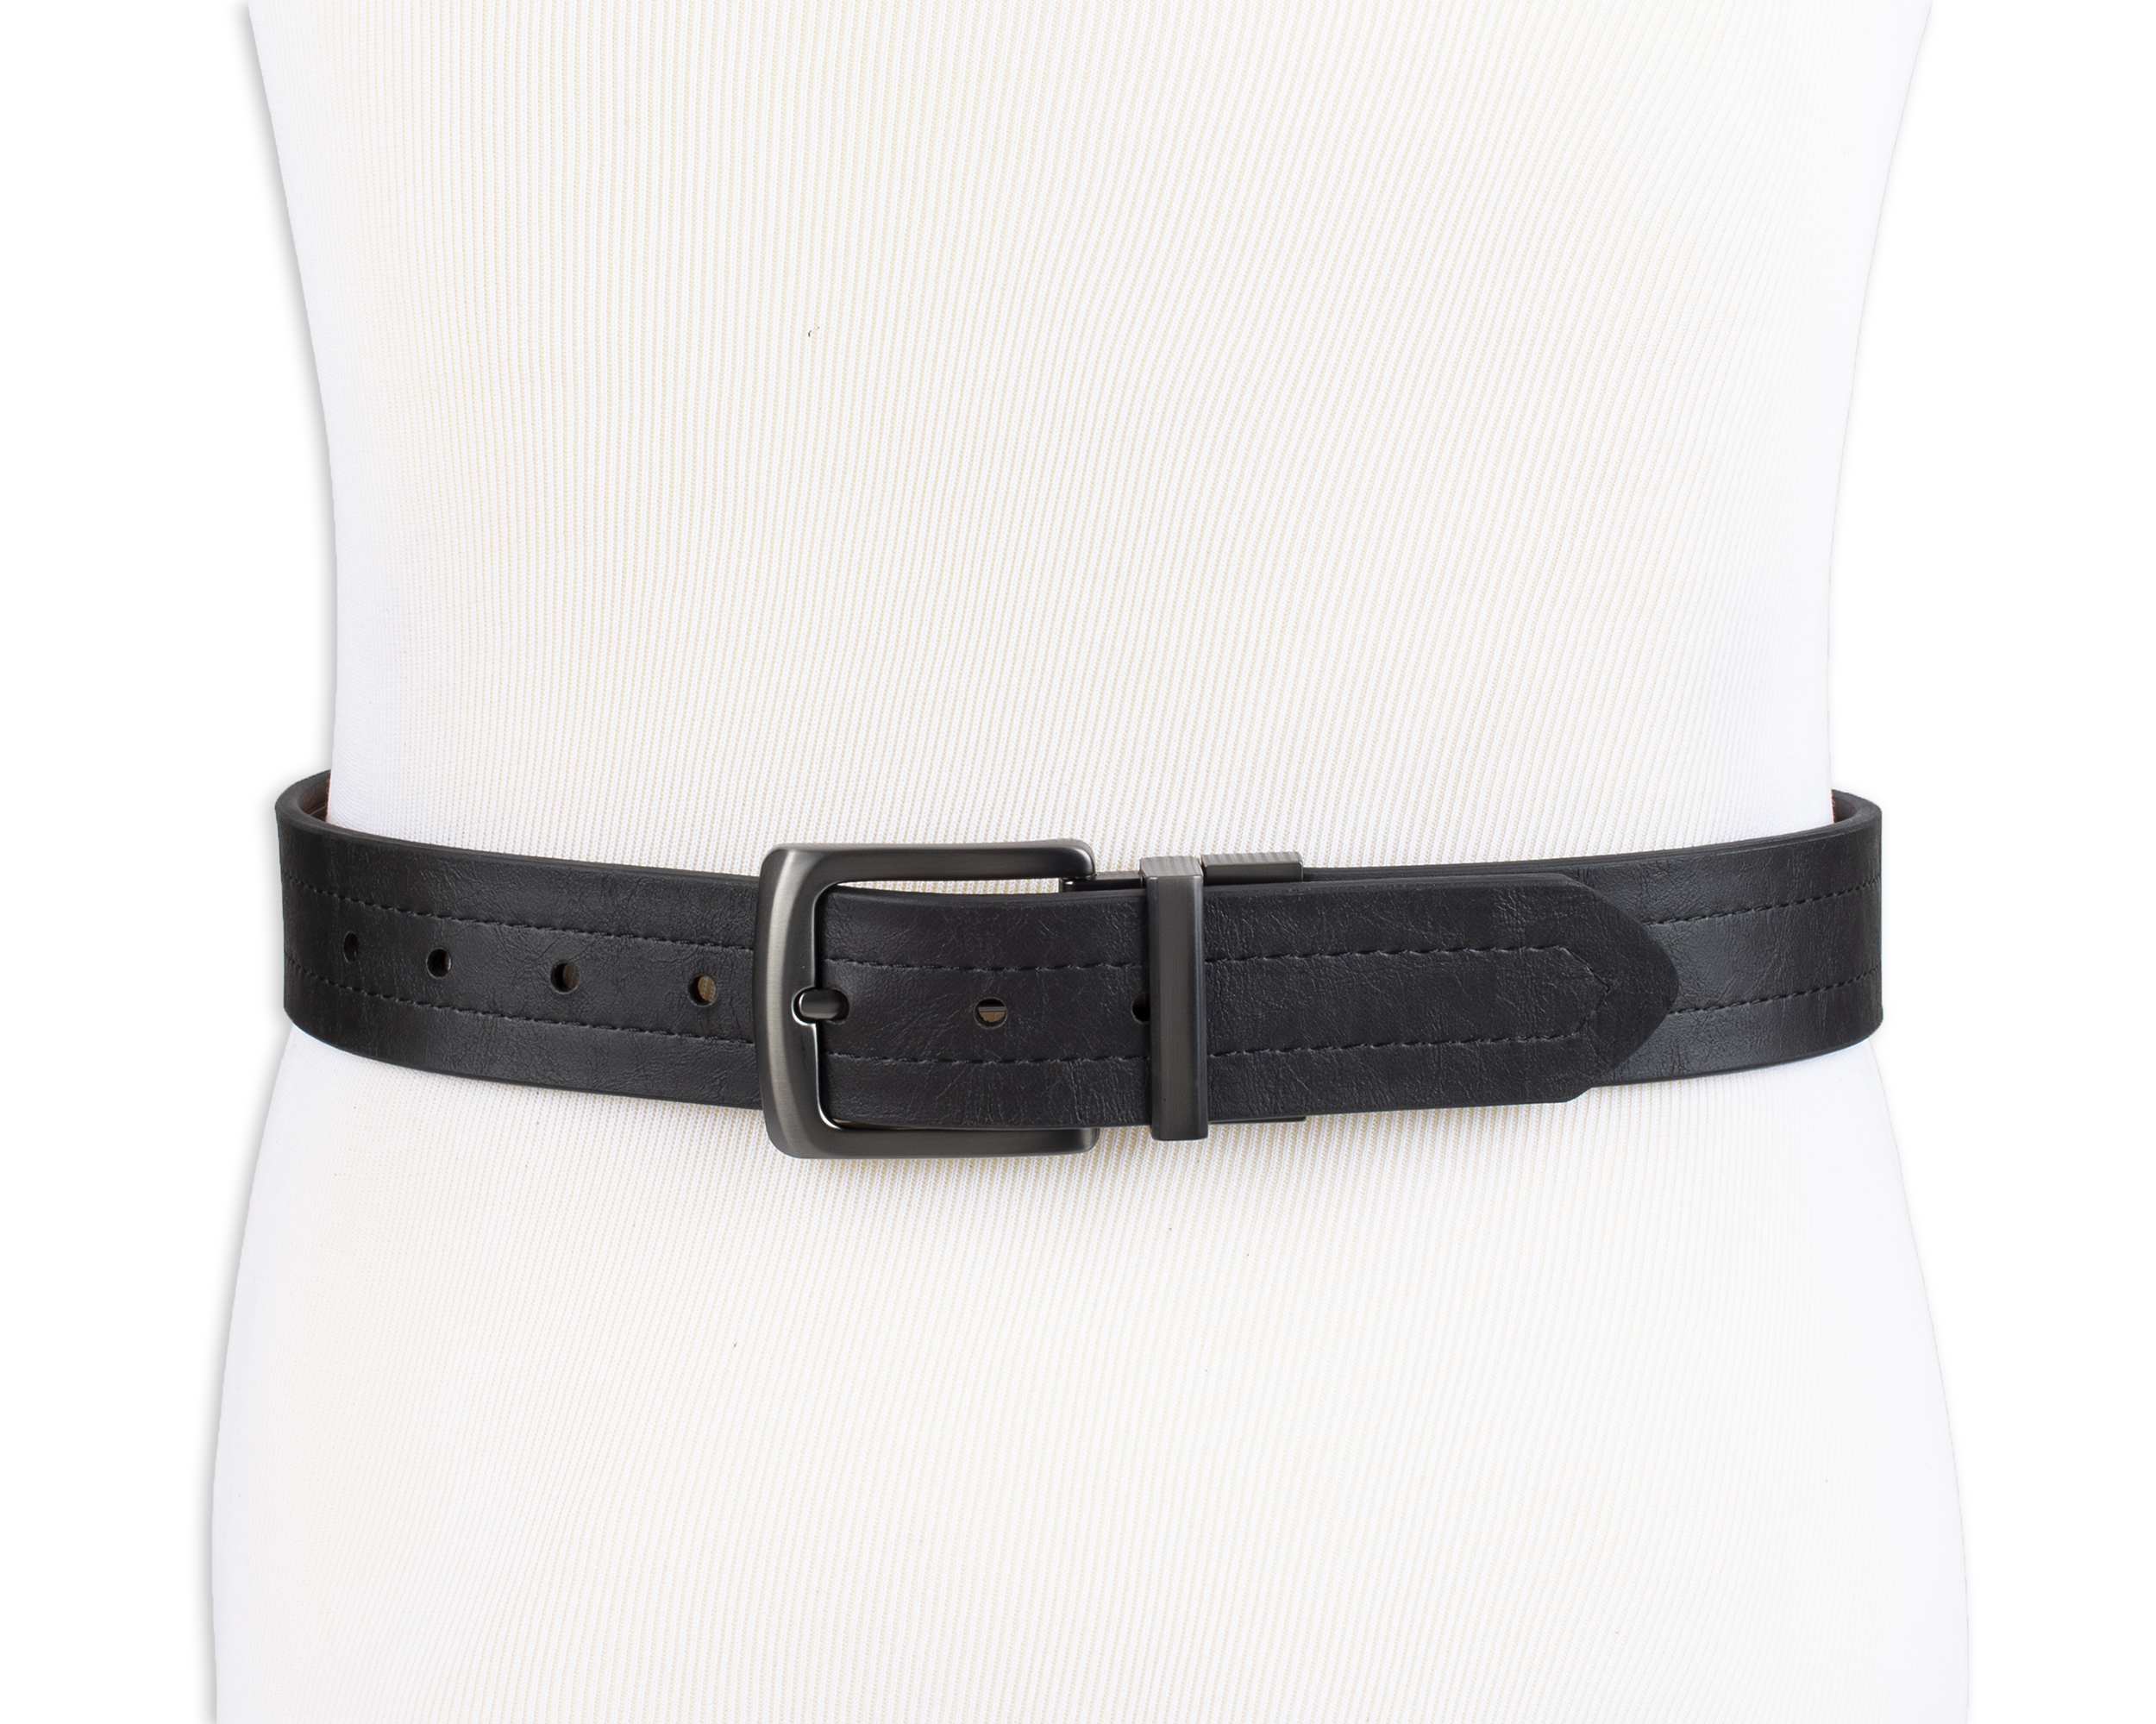 Levi's Men's Two-in-One Reversible Casual Belt, Brown/Black - image 7 of 9